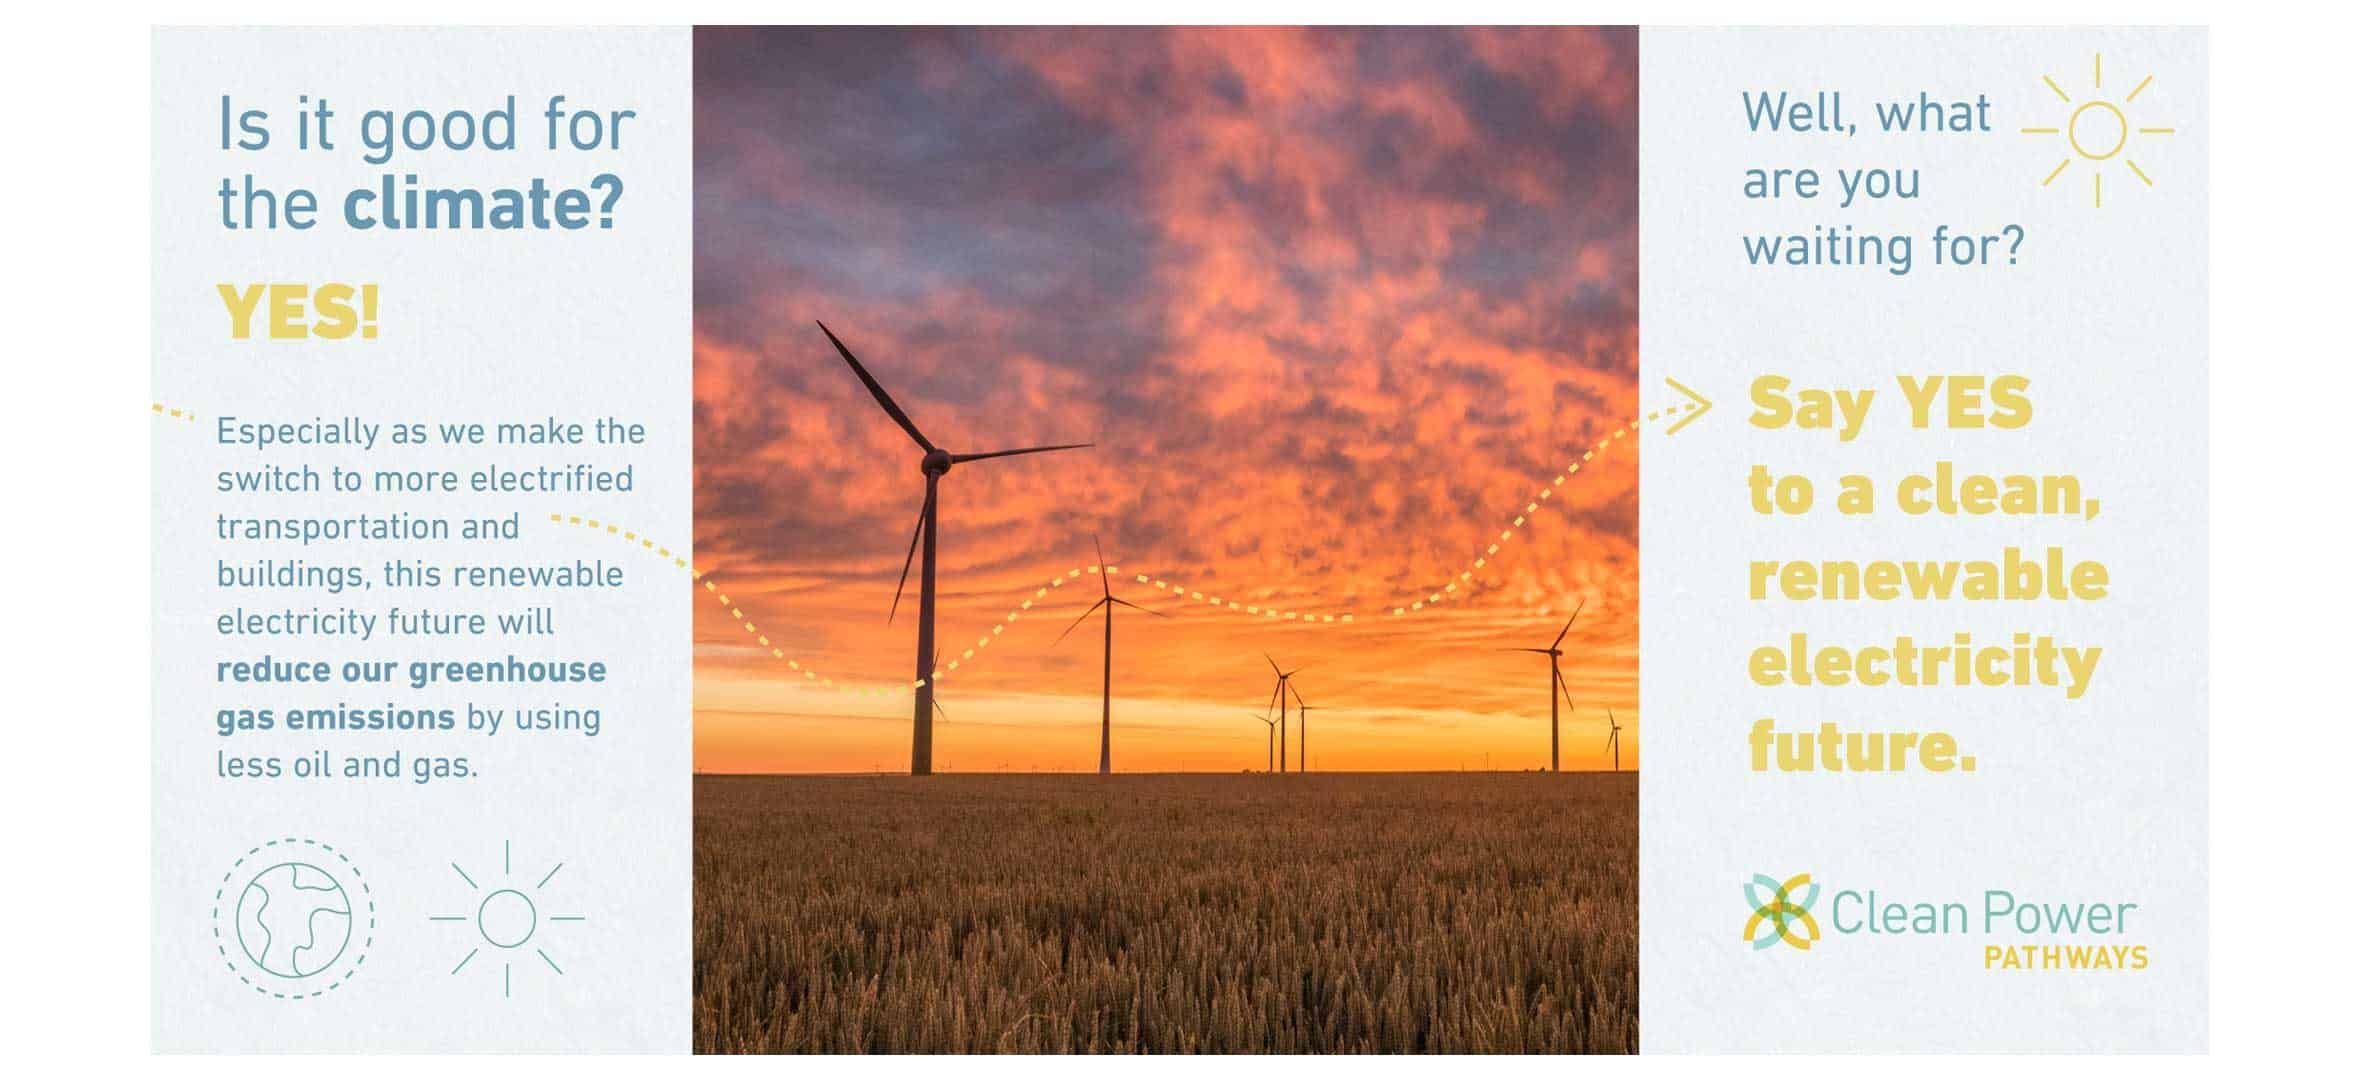 Sunset sky with wind turbines and text overlay 'say yes to a clean renewable electricity future'